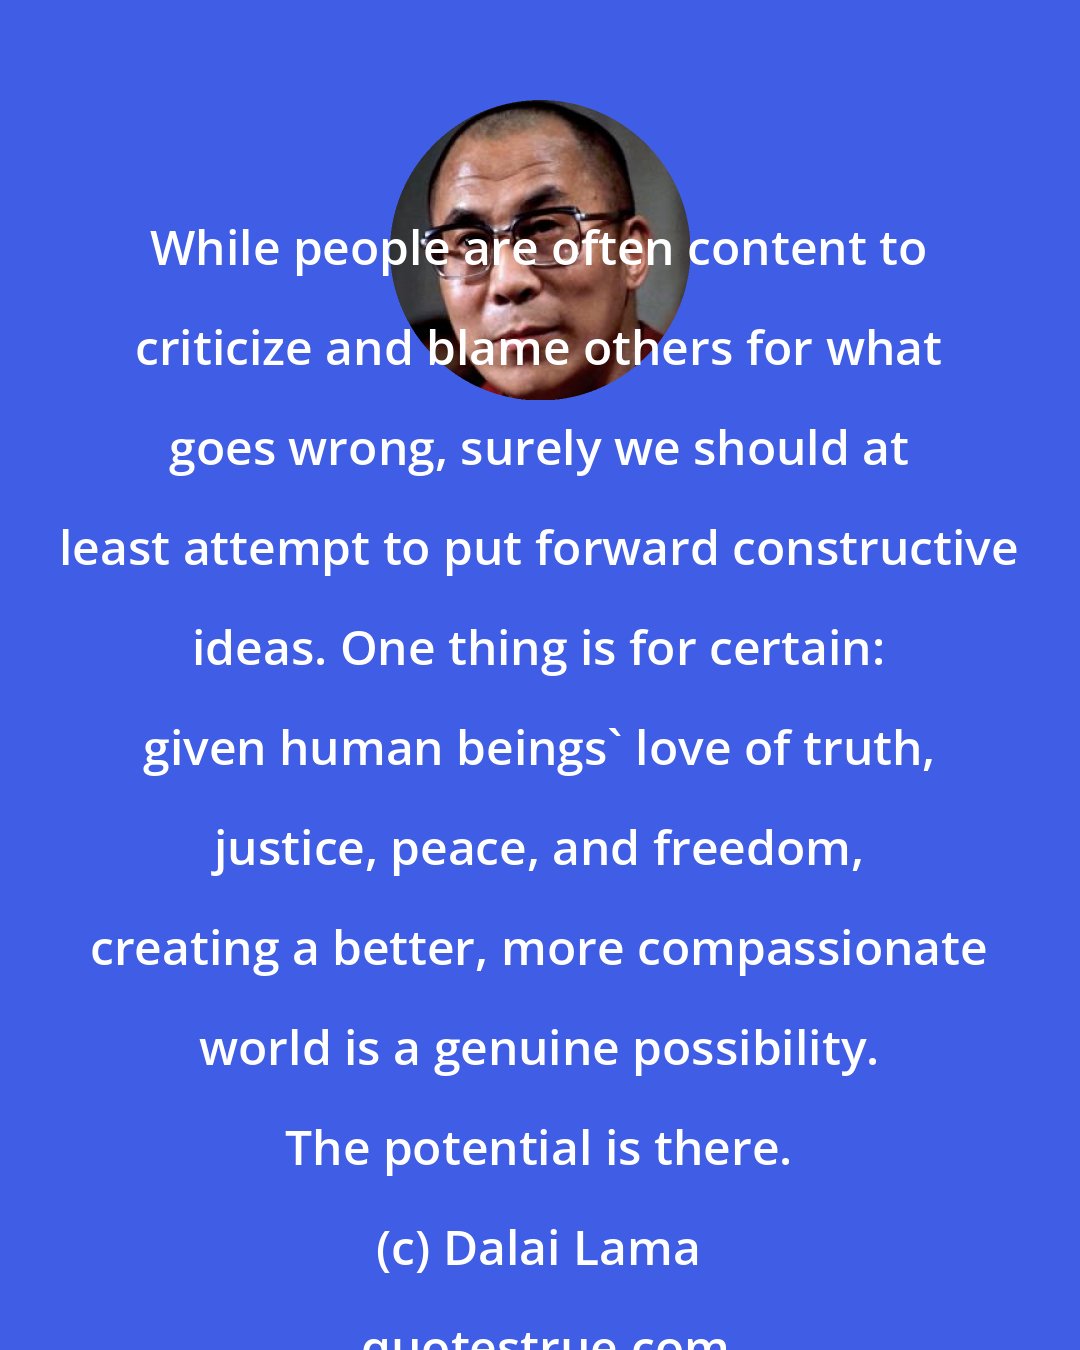 Dalai Lama: While people are often content to criticize and blame others for what goes wrong, surely we should at least attempt to put forward constructive ideas. One thing is for certain: given human beings' love of truth, justice, peace, and freedom, creating a better, more compassionate world is a genuine possibility. The potential is there.